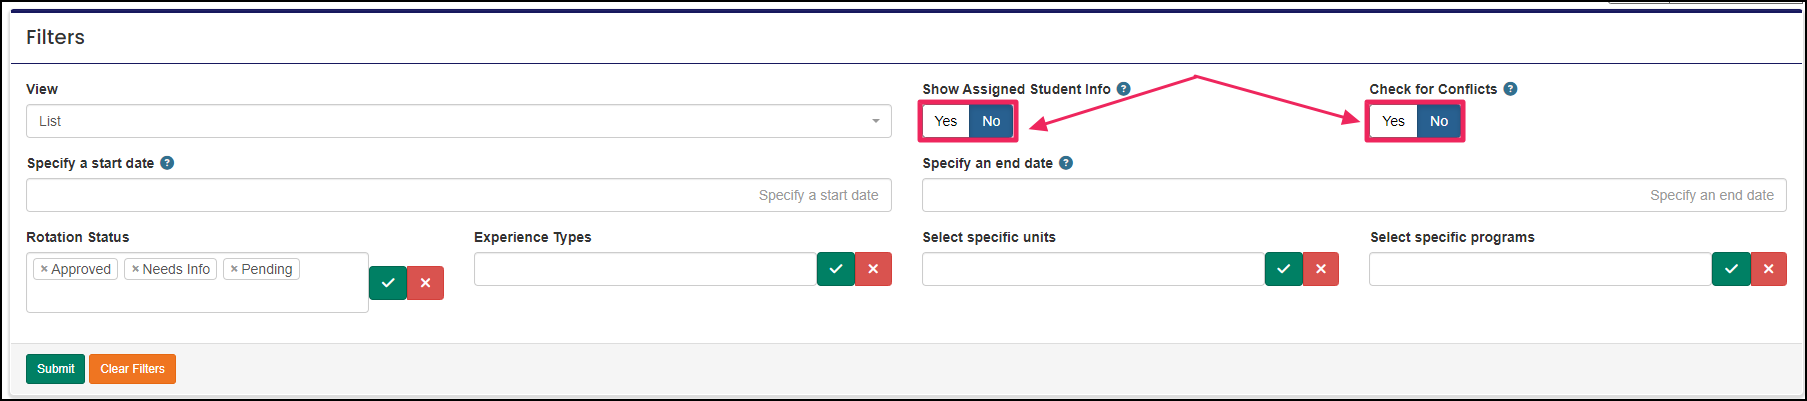 Report filters highlighting the show assigned student info toggle and the check for conflicts toggle.